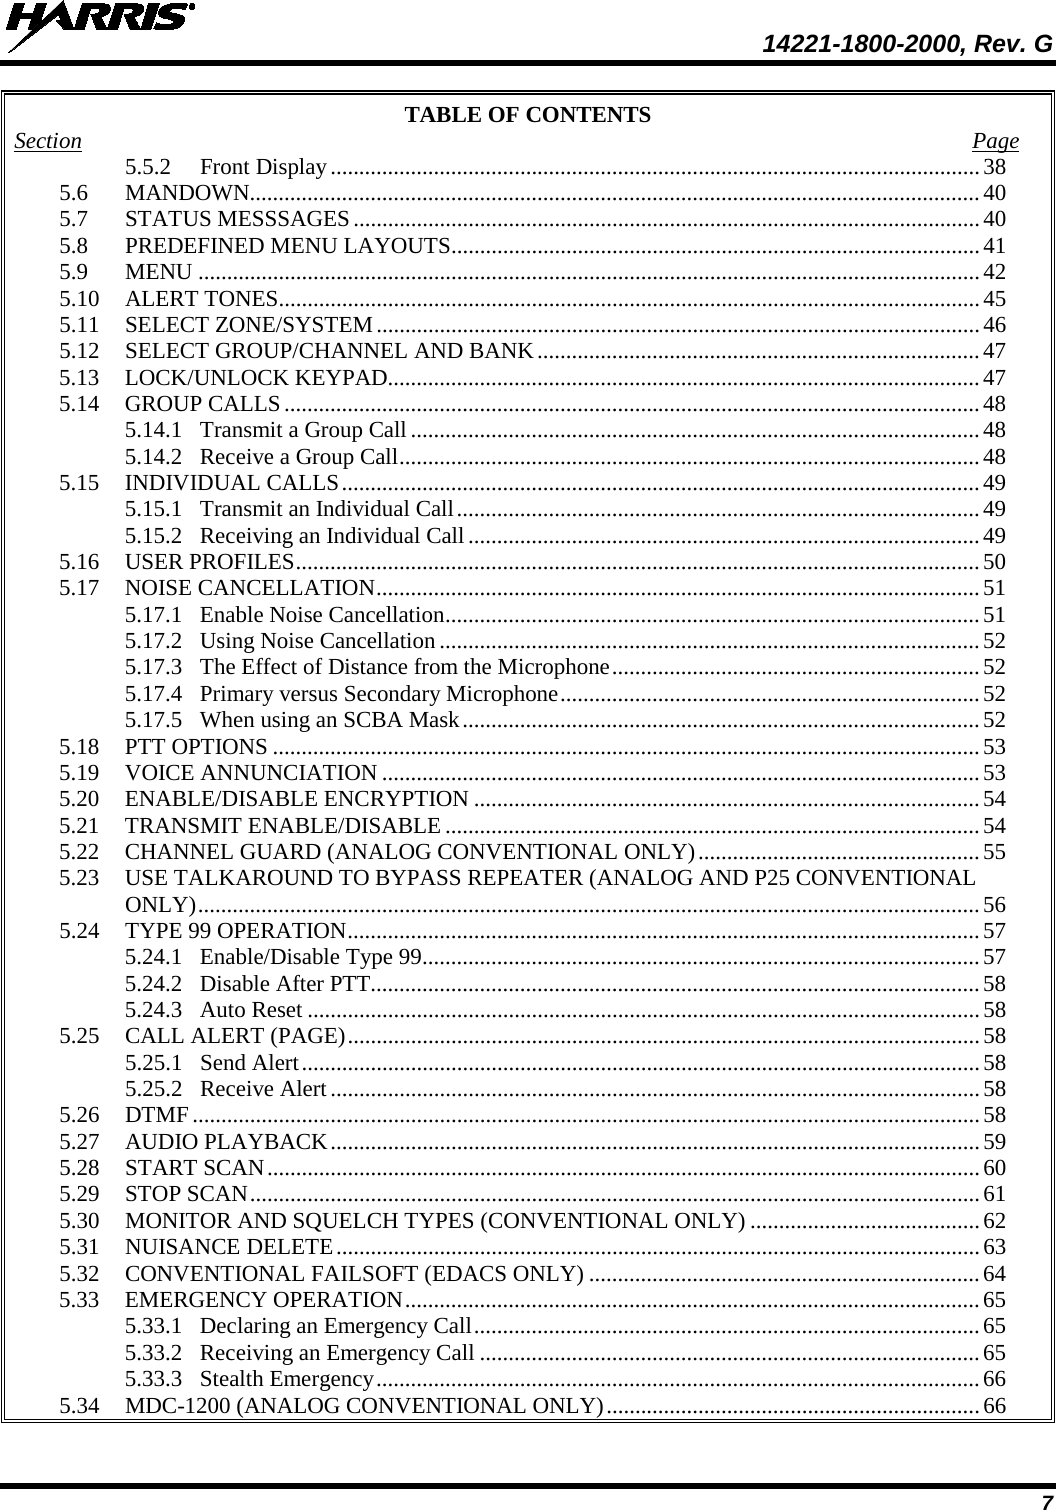  14221-1800-2000, Rev. G 7 TABLE OF CONTENTS Section  Page 5.5.2 Front Display ................................................................................................................. 38 5.6 MANDOWN............................................................................................................................... 40 5.7 STATUS MESSSAGES ............................................................................................................. 40 5.8 PREDEFINED MENU LAYOUTS............................................................................................ 41 5.9 MENU ........................................................................................................................................ 42 5.10 ALERT TONES.......................................................................................................................... 45 5.11 SELECT ZONE/SYSTEM ......................................................................................................... 46 5.12 SELECT GROUP/CHANNEL AND BANK ............................................................................. 47 5.13 LOCK/UNLOCK KEYPAD....................................................................................................... 47 5.14 GROUP CALLS ......................................................................................................................... 48 5.14.1 Transmit a Group Call ................................................................................................... 48 5.14.2 Receive a Group Call ..................................................................................................... 48 5.15 INDIVIDUAL CALLS ............................................................................................................... 49 5.15.1 Transmit an Individual Call ........................................................................................... 49 5.15.2 Receiving an Individual Call ......................................................................................... 49 5.16 USER PROFILES ....................................................................................................................... 50 5.17 NOISE CANCELLATION ......................................................................................................... 51 5.17.1 Enable Noise Cancellation ............................................................................................. 51 5.17.2 Using Noise Cancellation .............................................................................................. 52 5.17.3 The Effect of Distance from the Microphone ................................................................ 52 5.17.4 Primary versus Secondary Microphone ......................................................................... 52 5.17.5 When using an SCBA Mask .......................................................................................... 52 5.18 PTT OPTIONS ........................................................................................................................... 53 5.19 VOICE ANNUNCIATION ........................................................................................................ 53 5.20 ENABLE/DISABLE ENCRYPTION ........................................................................................ 54 5.21 TRANSMIT ENABLE/DISABLE ............................................................................................. 54 5.22 CHANNEL GUARD (ANALOG CONVENTIONAL ONLY) ................................................. 55 5.23 USE TALKAROUND TO BYPASS REPEATER (ANALOG AND P25 CONVENTIONAL ONLY) ........................................................................................................................................ 56 5.24 TYPE 99 OPERATION .............................................................................................................. 57 5.24.1 Enable/Disable Type 99 ................................................................................................. 57 5.24.2 Disable After PTT.......................................................................................................... 58 5.24.3 Auto Reset ..................................................................................................................... 58 5.25 CALL ALERT (PAGE) .............................................................................................................. 58 5.25.1 Send Alert ...................................................................................................................... 58 5.25.2 Receive Alert ................................................................................................................. 58 5.26 DTMF ......................................................................................................................................... 58 5.27 AUDIO PLAYBACK ................................................................................................................. 59 5.28 START SCAN ............................................................................................................................ 60 5.29 STOP SCAN ............................................................................................................................... 61 5.30 MONITOR AND SQUELCH TYPES (CONVENTIONAL ONLY) ........................................ 62 5.31 NUISANCE DELETE ................................................................................................................ 63 5.32 CONVENTIONAL FAILSOFT (EDACS ONLY) .................................................................... 64 5.33 EMERGENCY OPERATION .................................................................................................... 65 5.33.1 Declaring an Emergency Call ........................................................................................ 65 5.33.2 Receiving an Emergency Call ....................................................................................... 65 5.33.3 Stealth Emergency ......................................................................................................... 66 5.34 MDC-1200 (ANALOG CONVENTIONAL ONLY) ................................................................. 66 